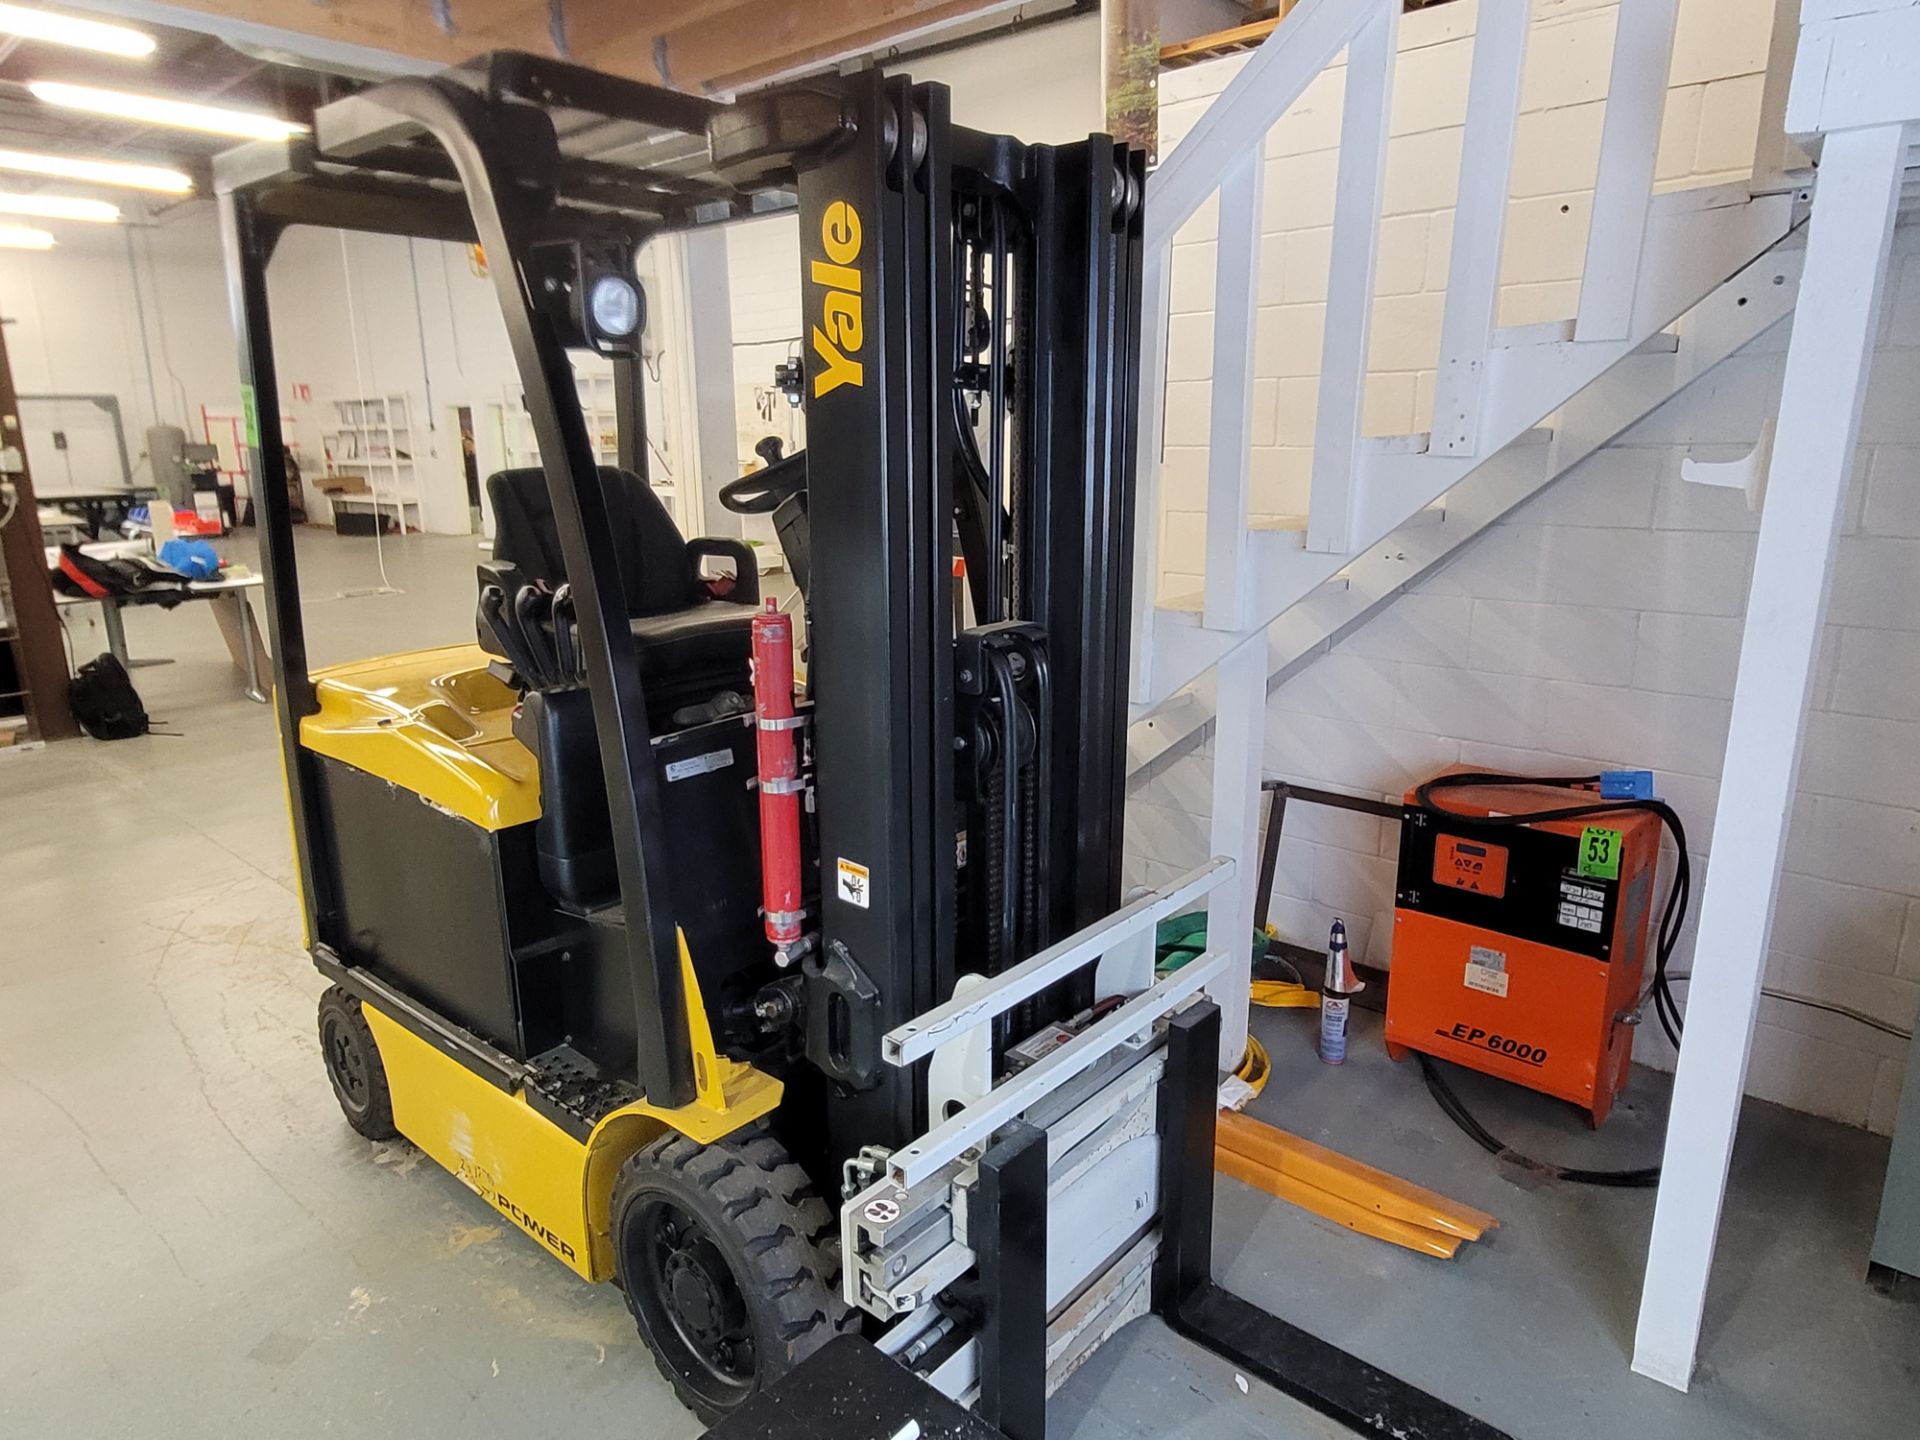 YALE Forklift mod. ERCO050VGN48TE85, 4200lbs cap., 48V, 17' H, 4900hrs, ser. A968N04749 with battery - Image 3 of 30